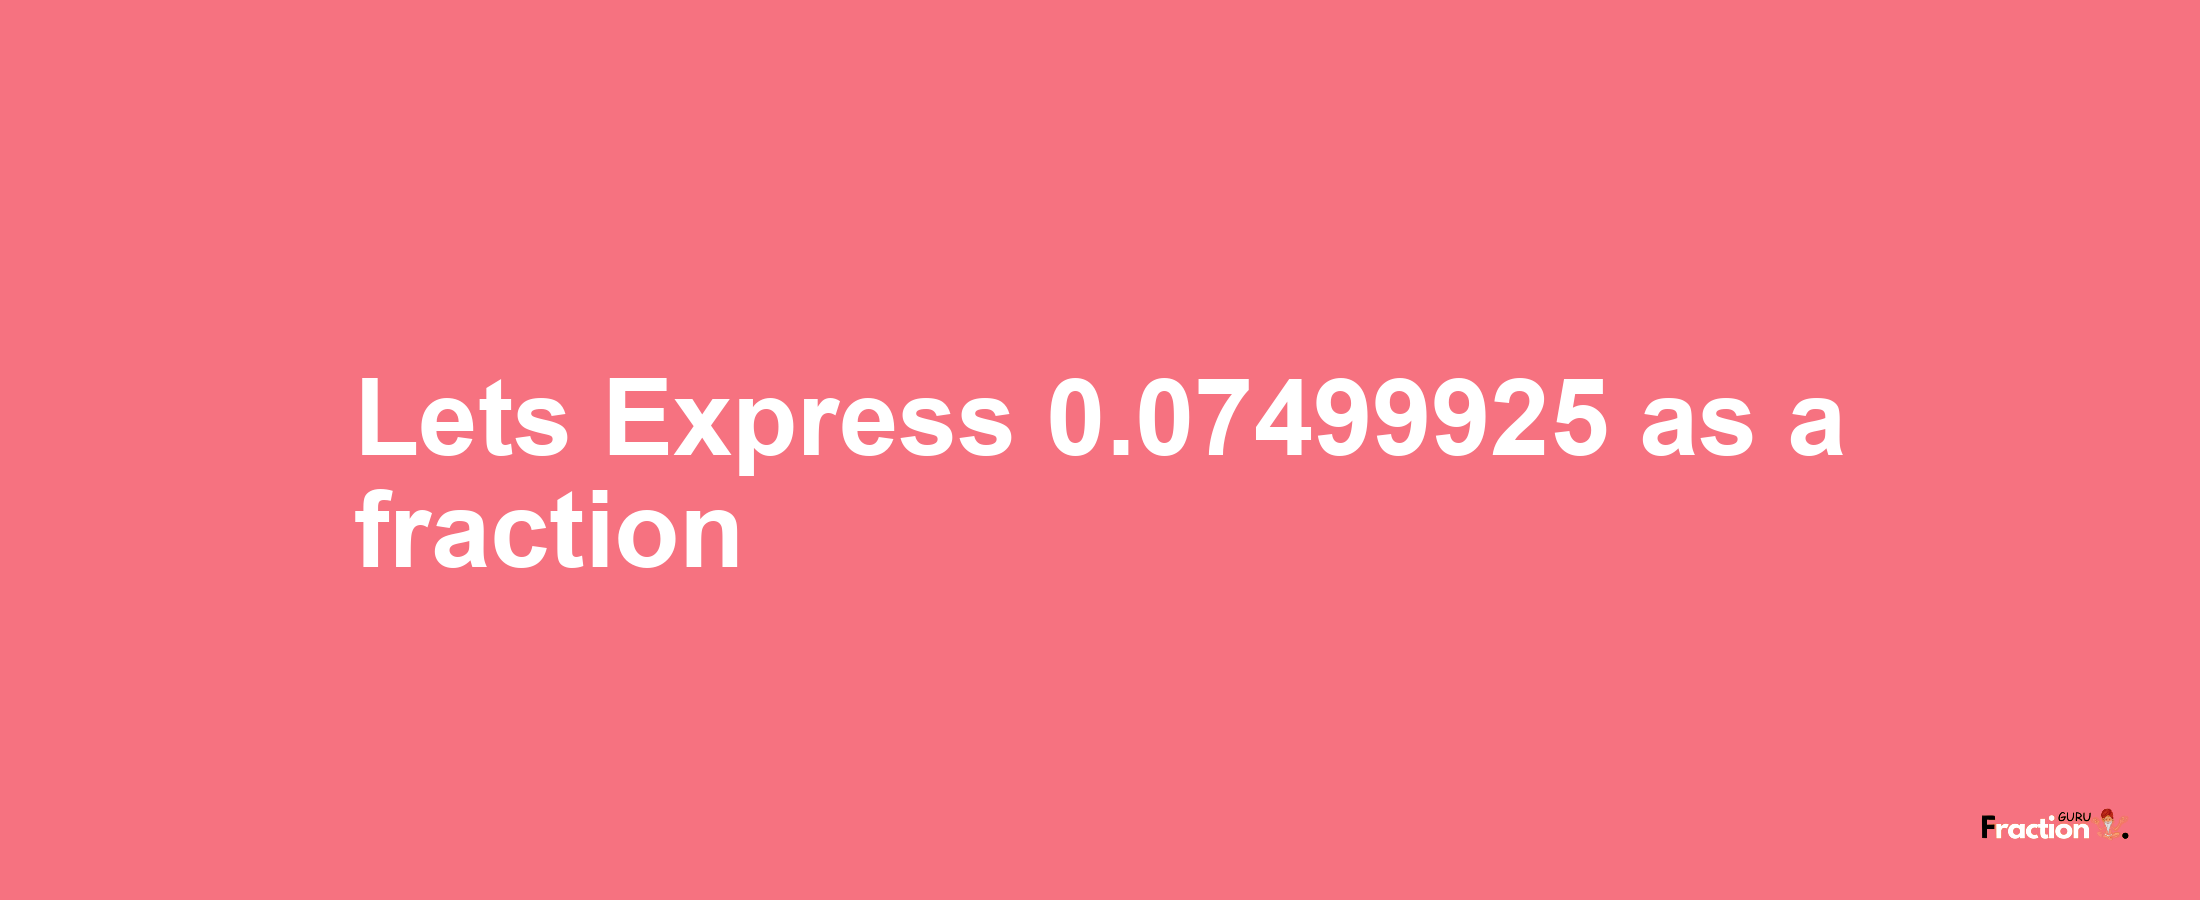 Lets Express 0.07499925 as afraction